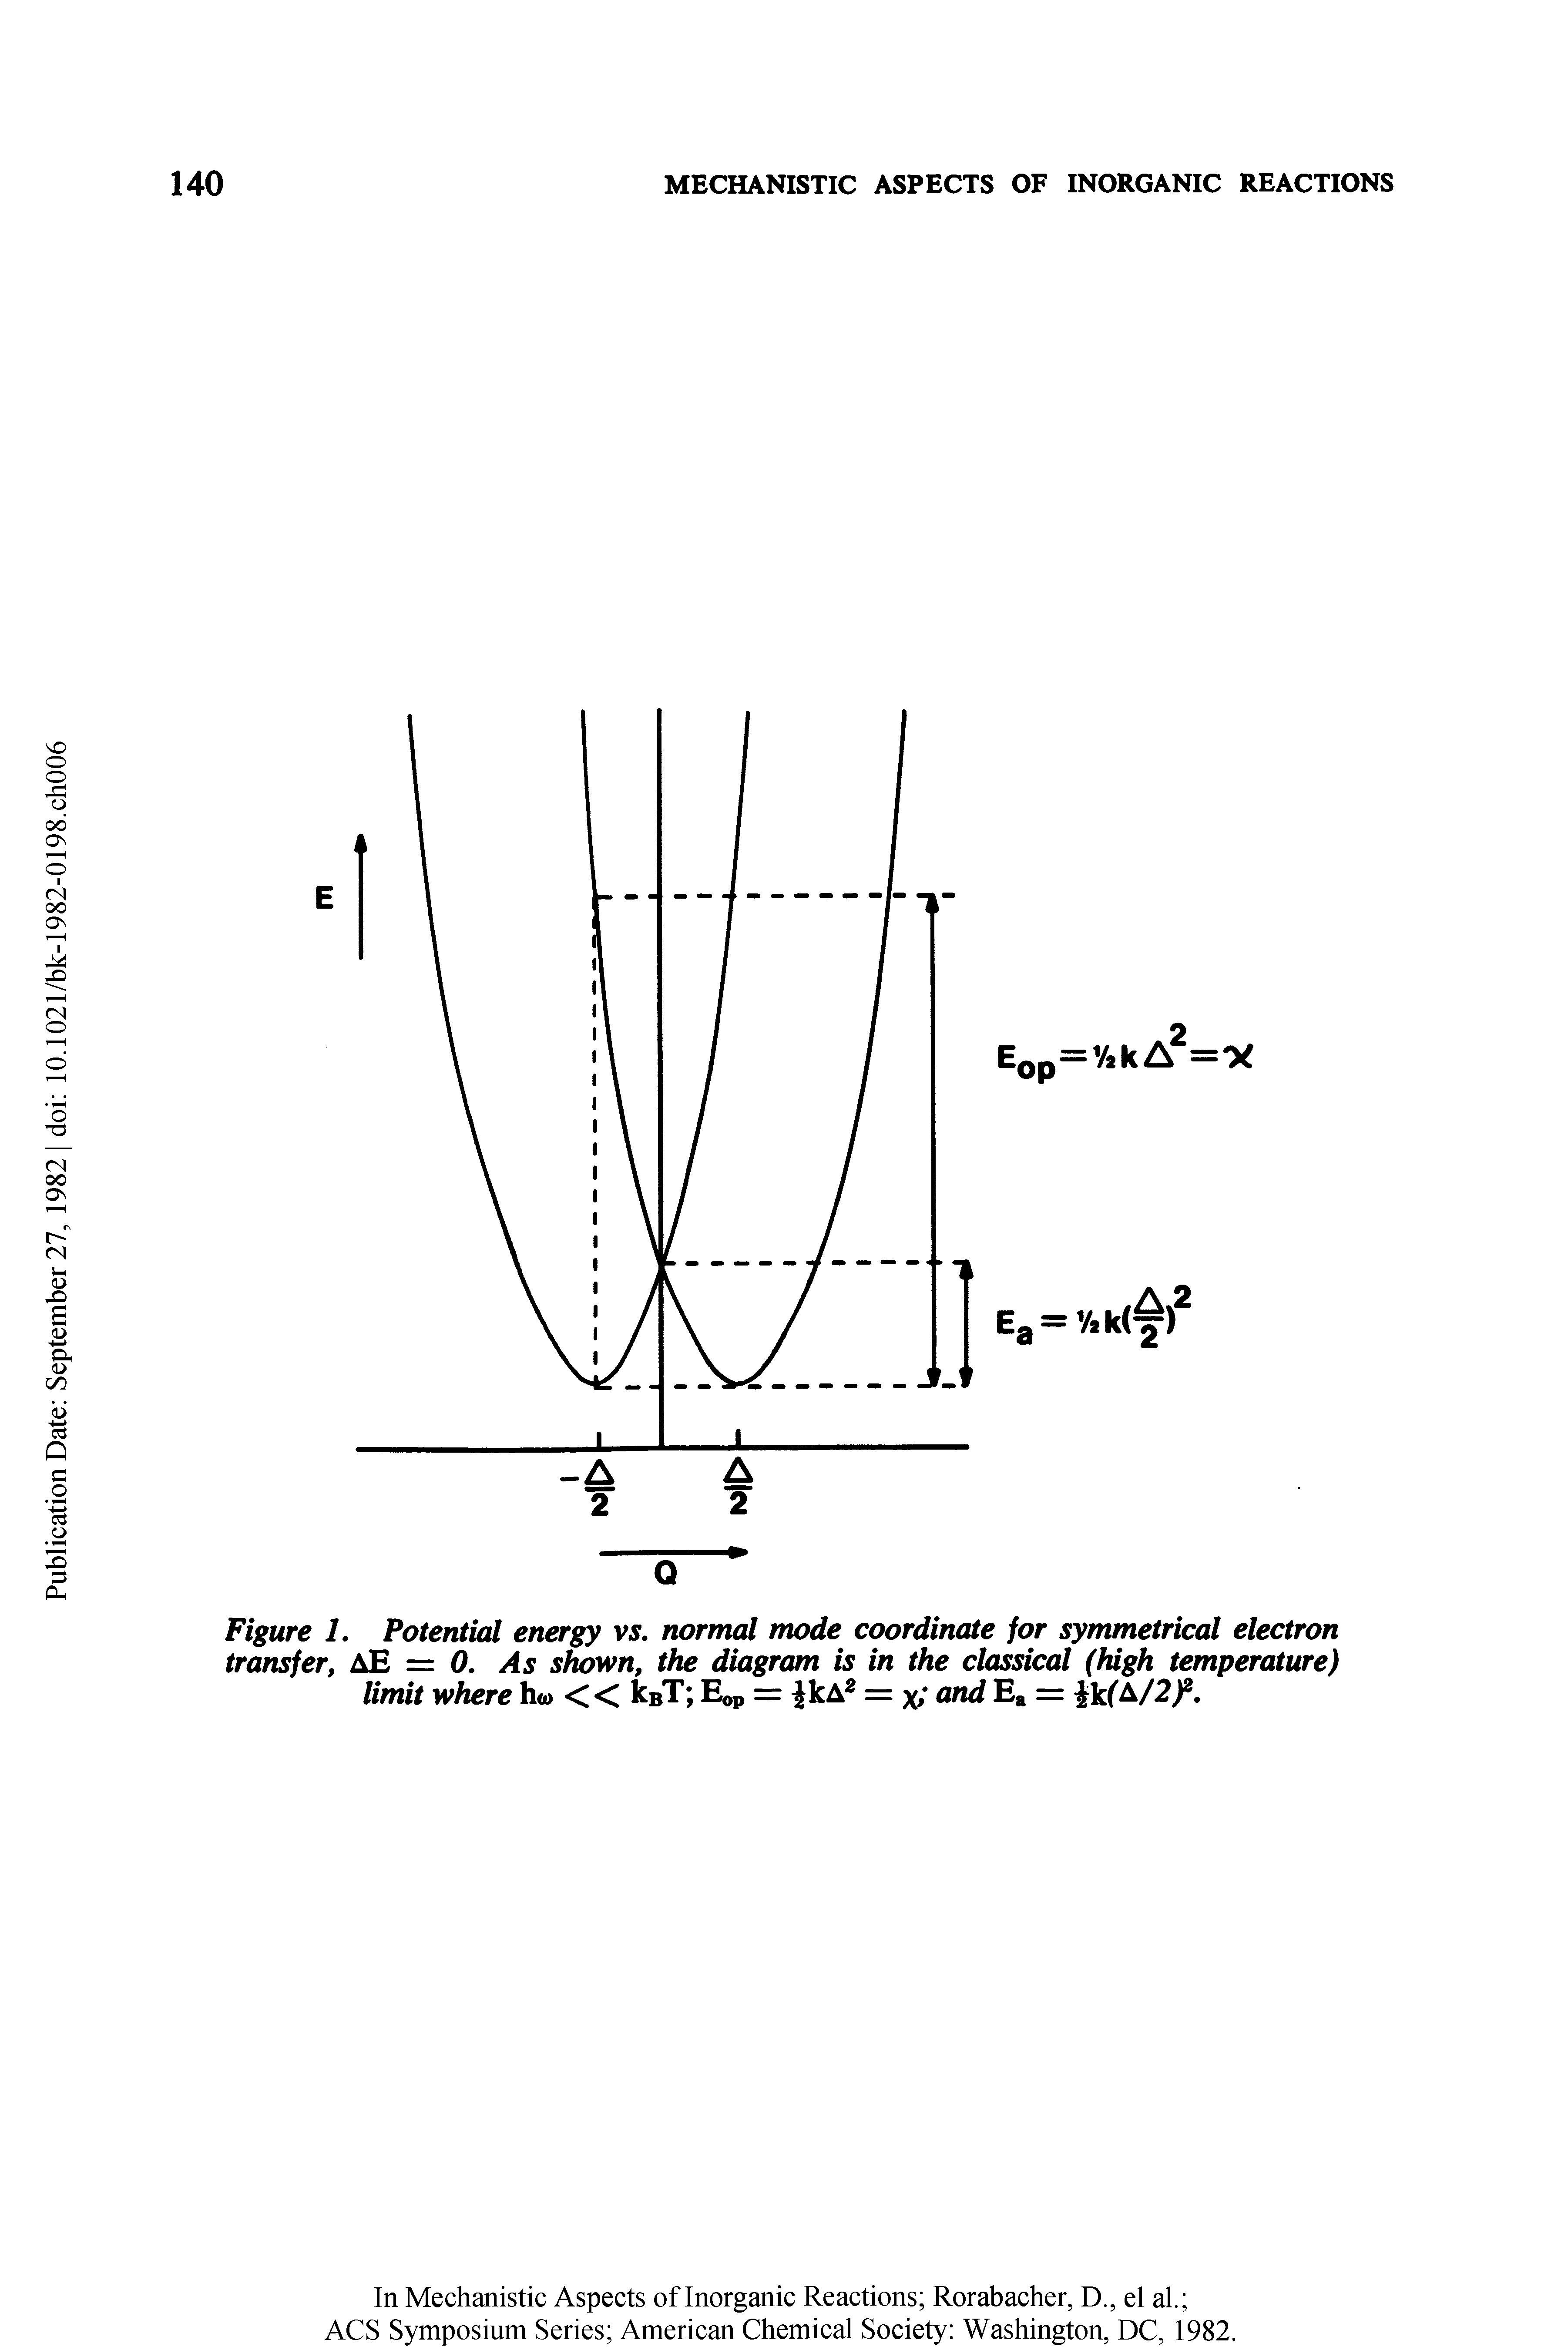 Figure 1. Potential energy vs. normal mode coordinate for symmetrical electron transfer, AE = 0. As shown, the diagram is in the classical (high temperature) limit where h<o << kBT Eop = kA2 = x and Ea = ik(A/2f.